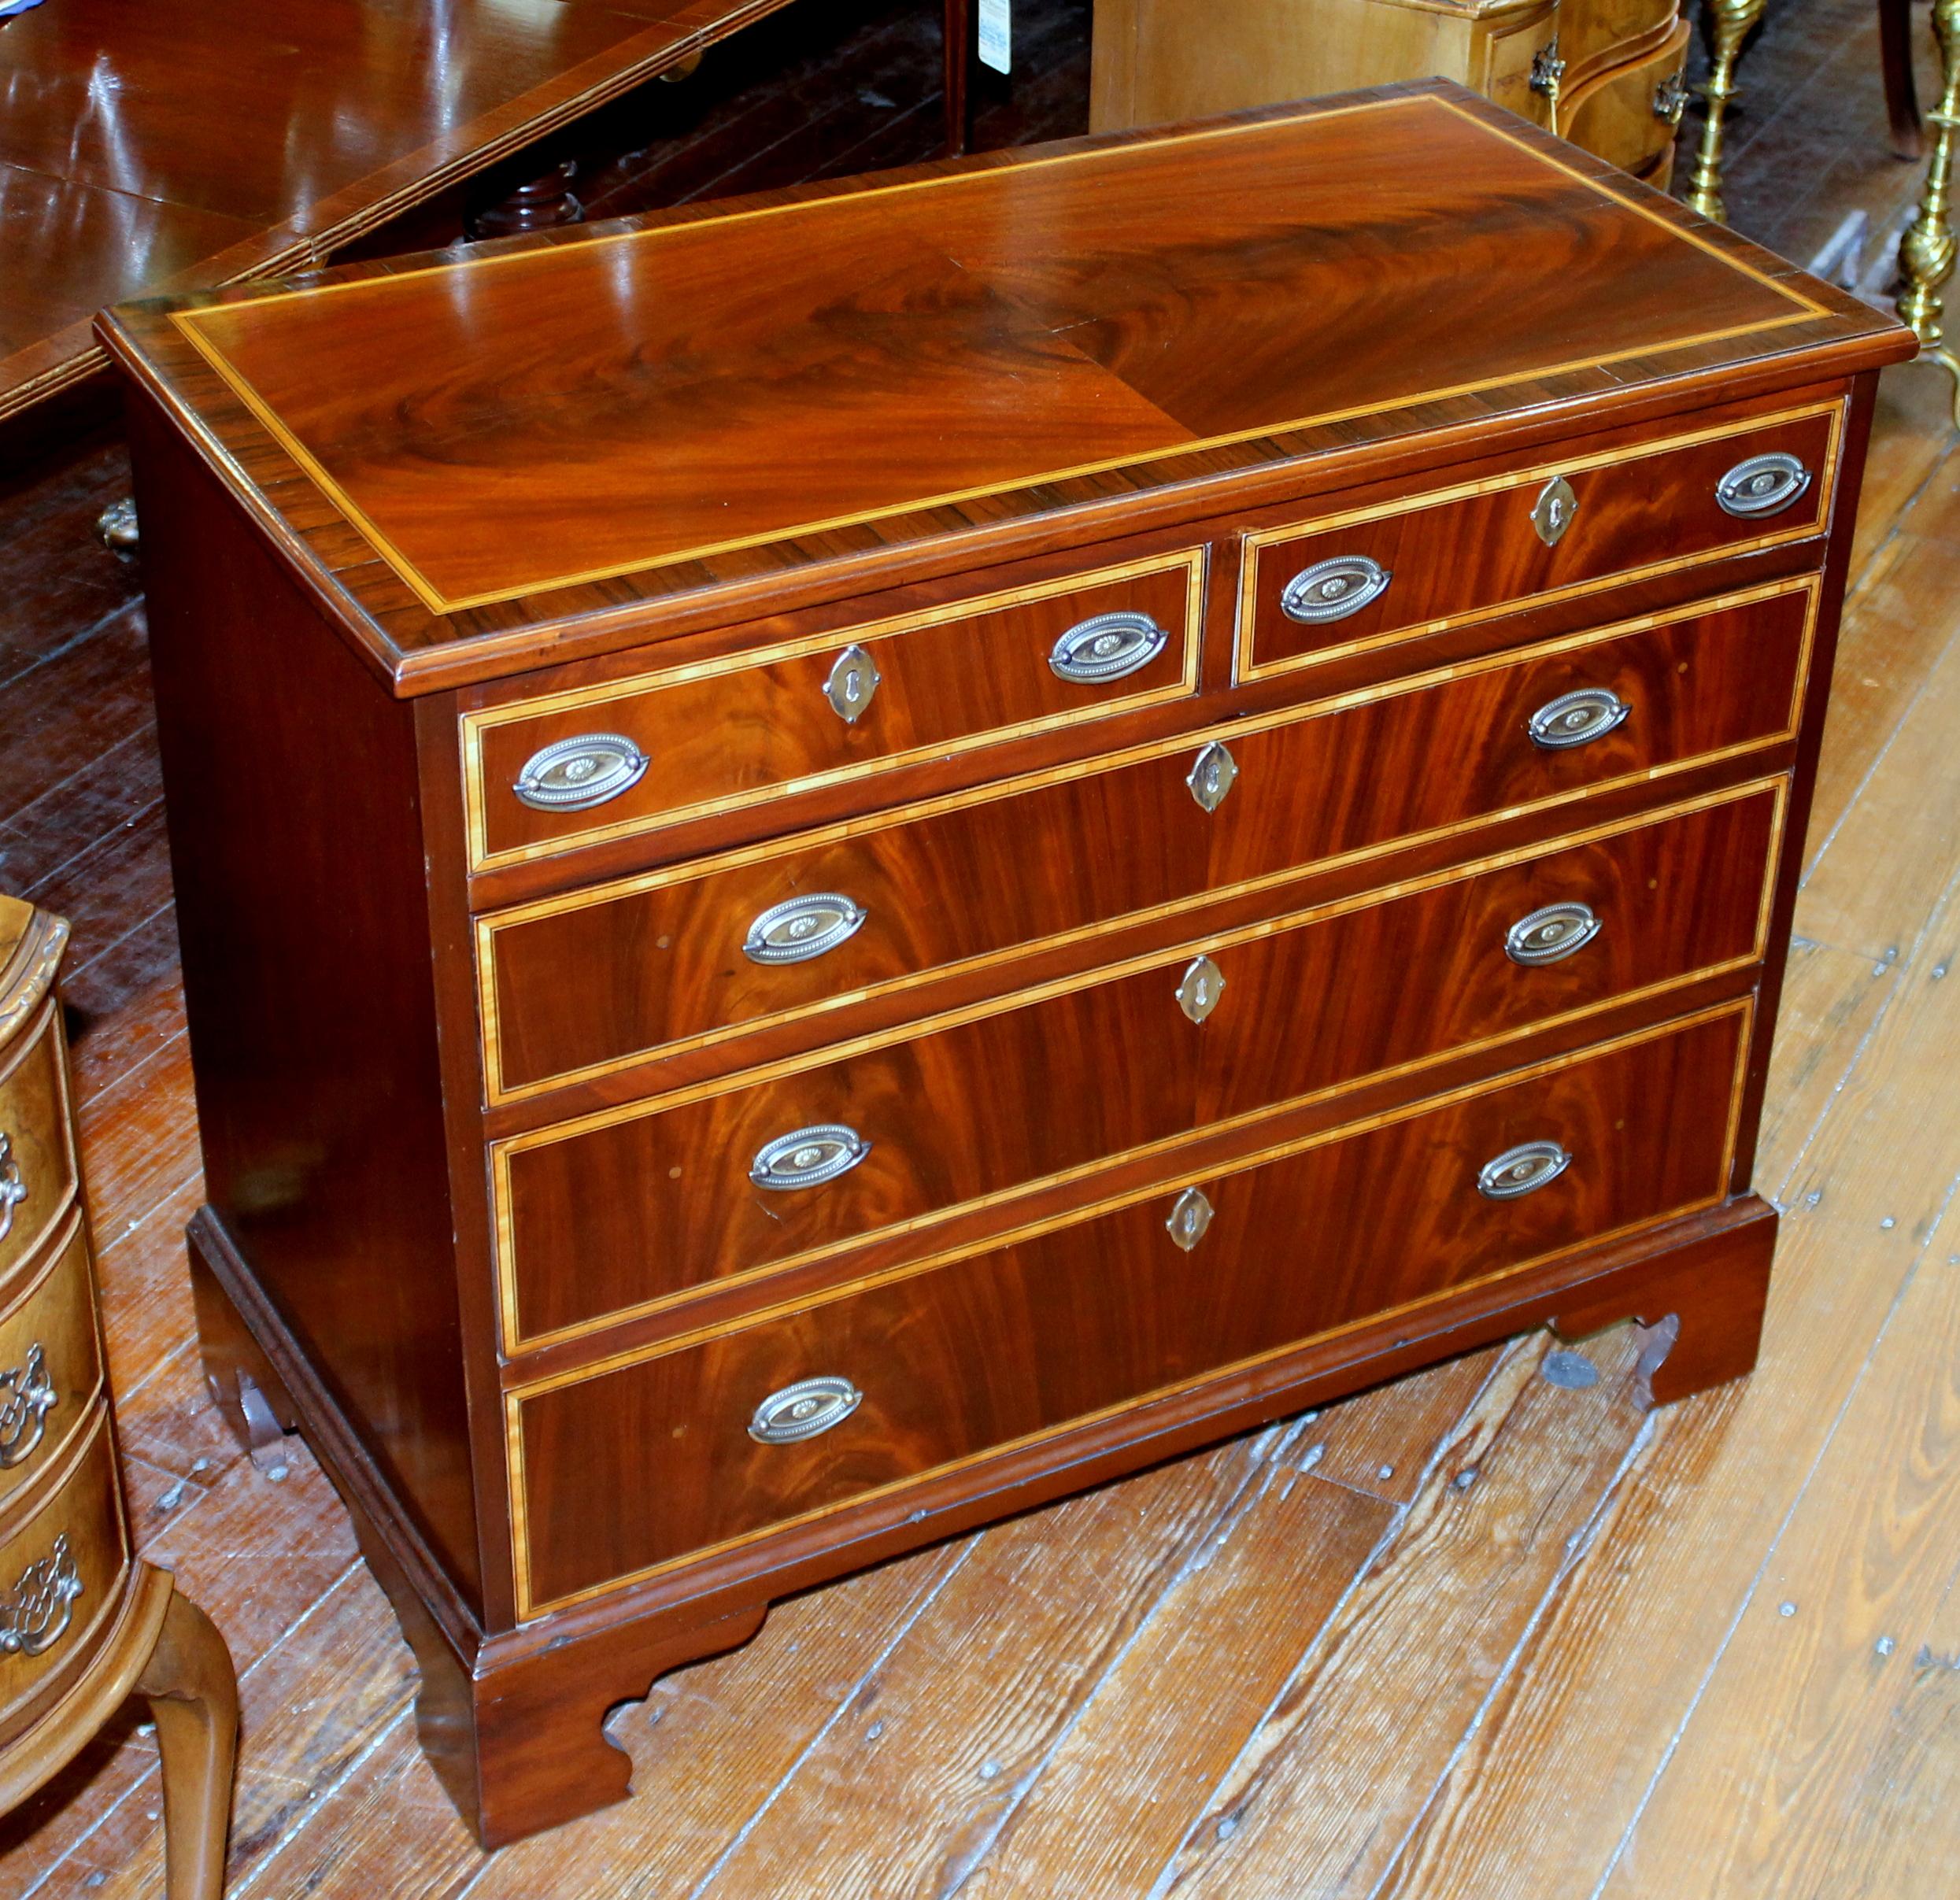 Hand-Crafted Antique English George III Inlaid Flame Mahogany Diminutive Low Chest of Drawers